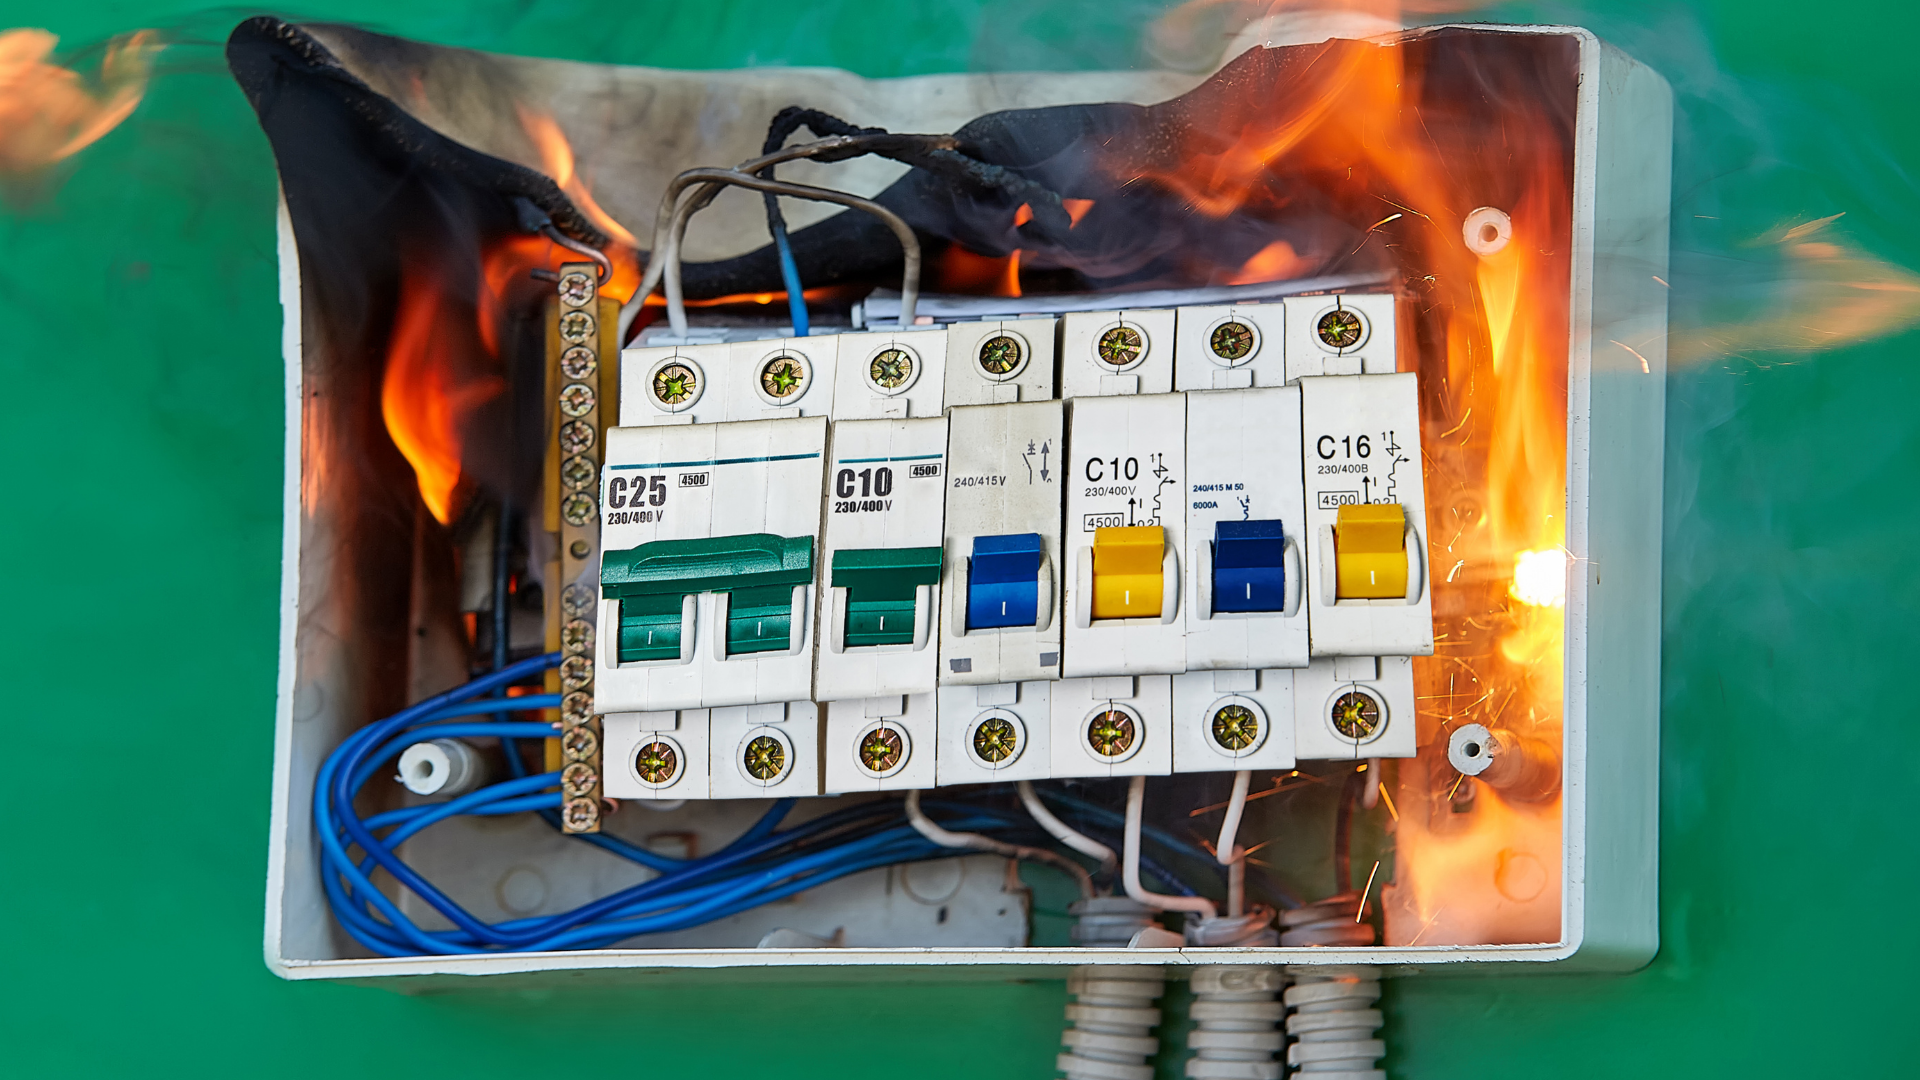 Electrical panel on fire with visible flames and smoke from burnt components, against a green background.